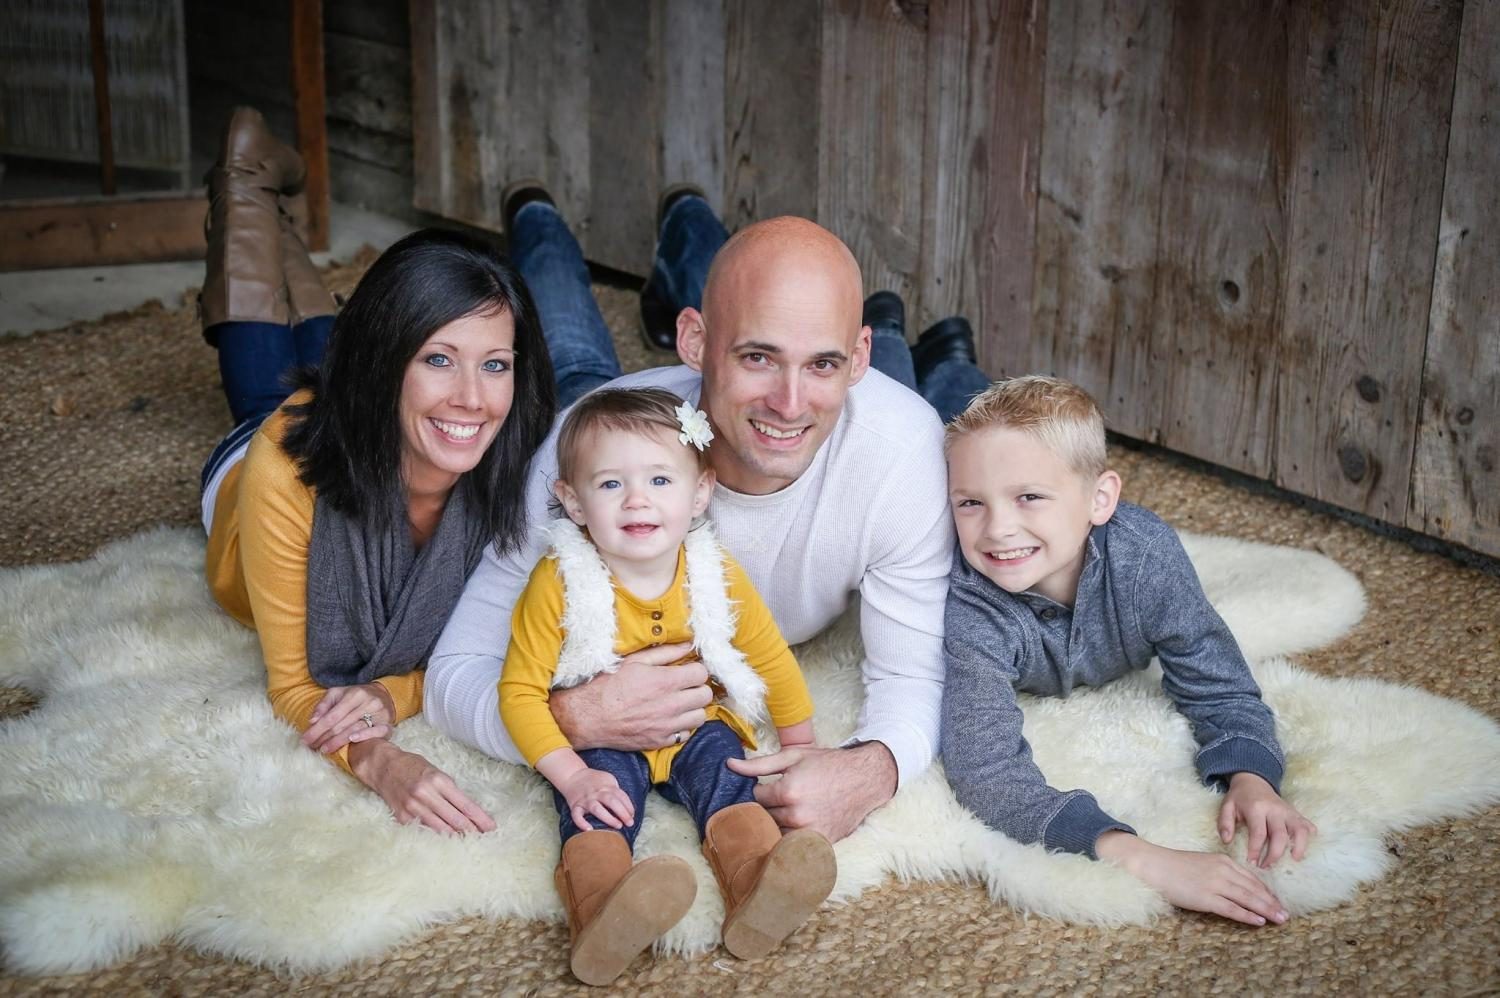 Matt Weis with his wife and children.